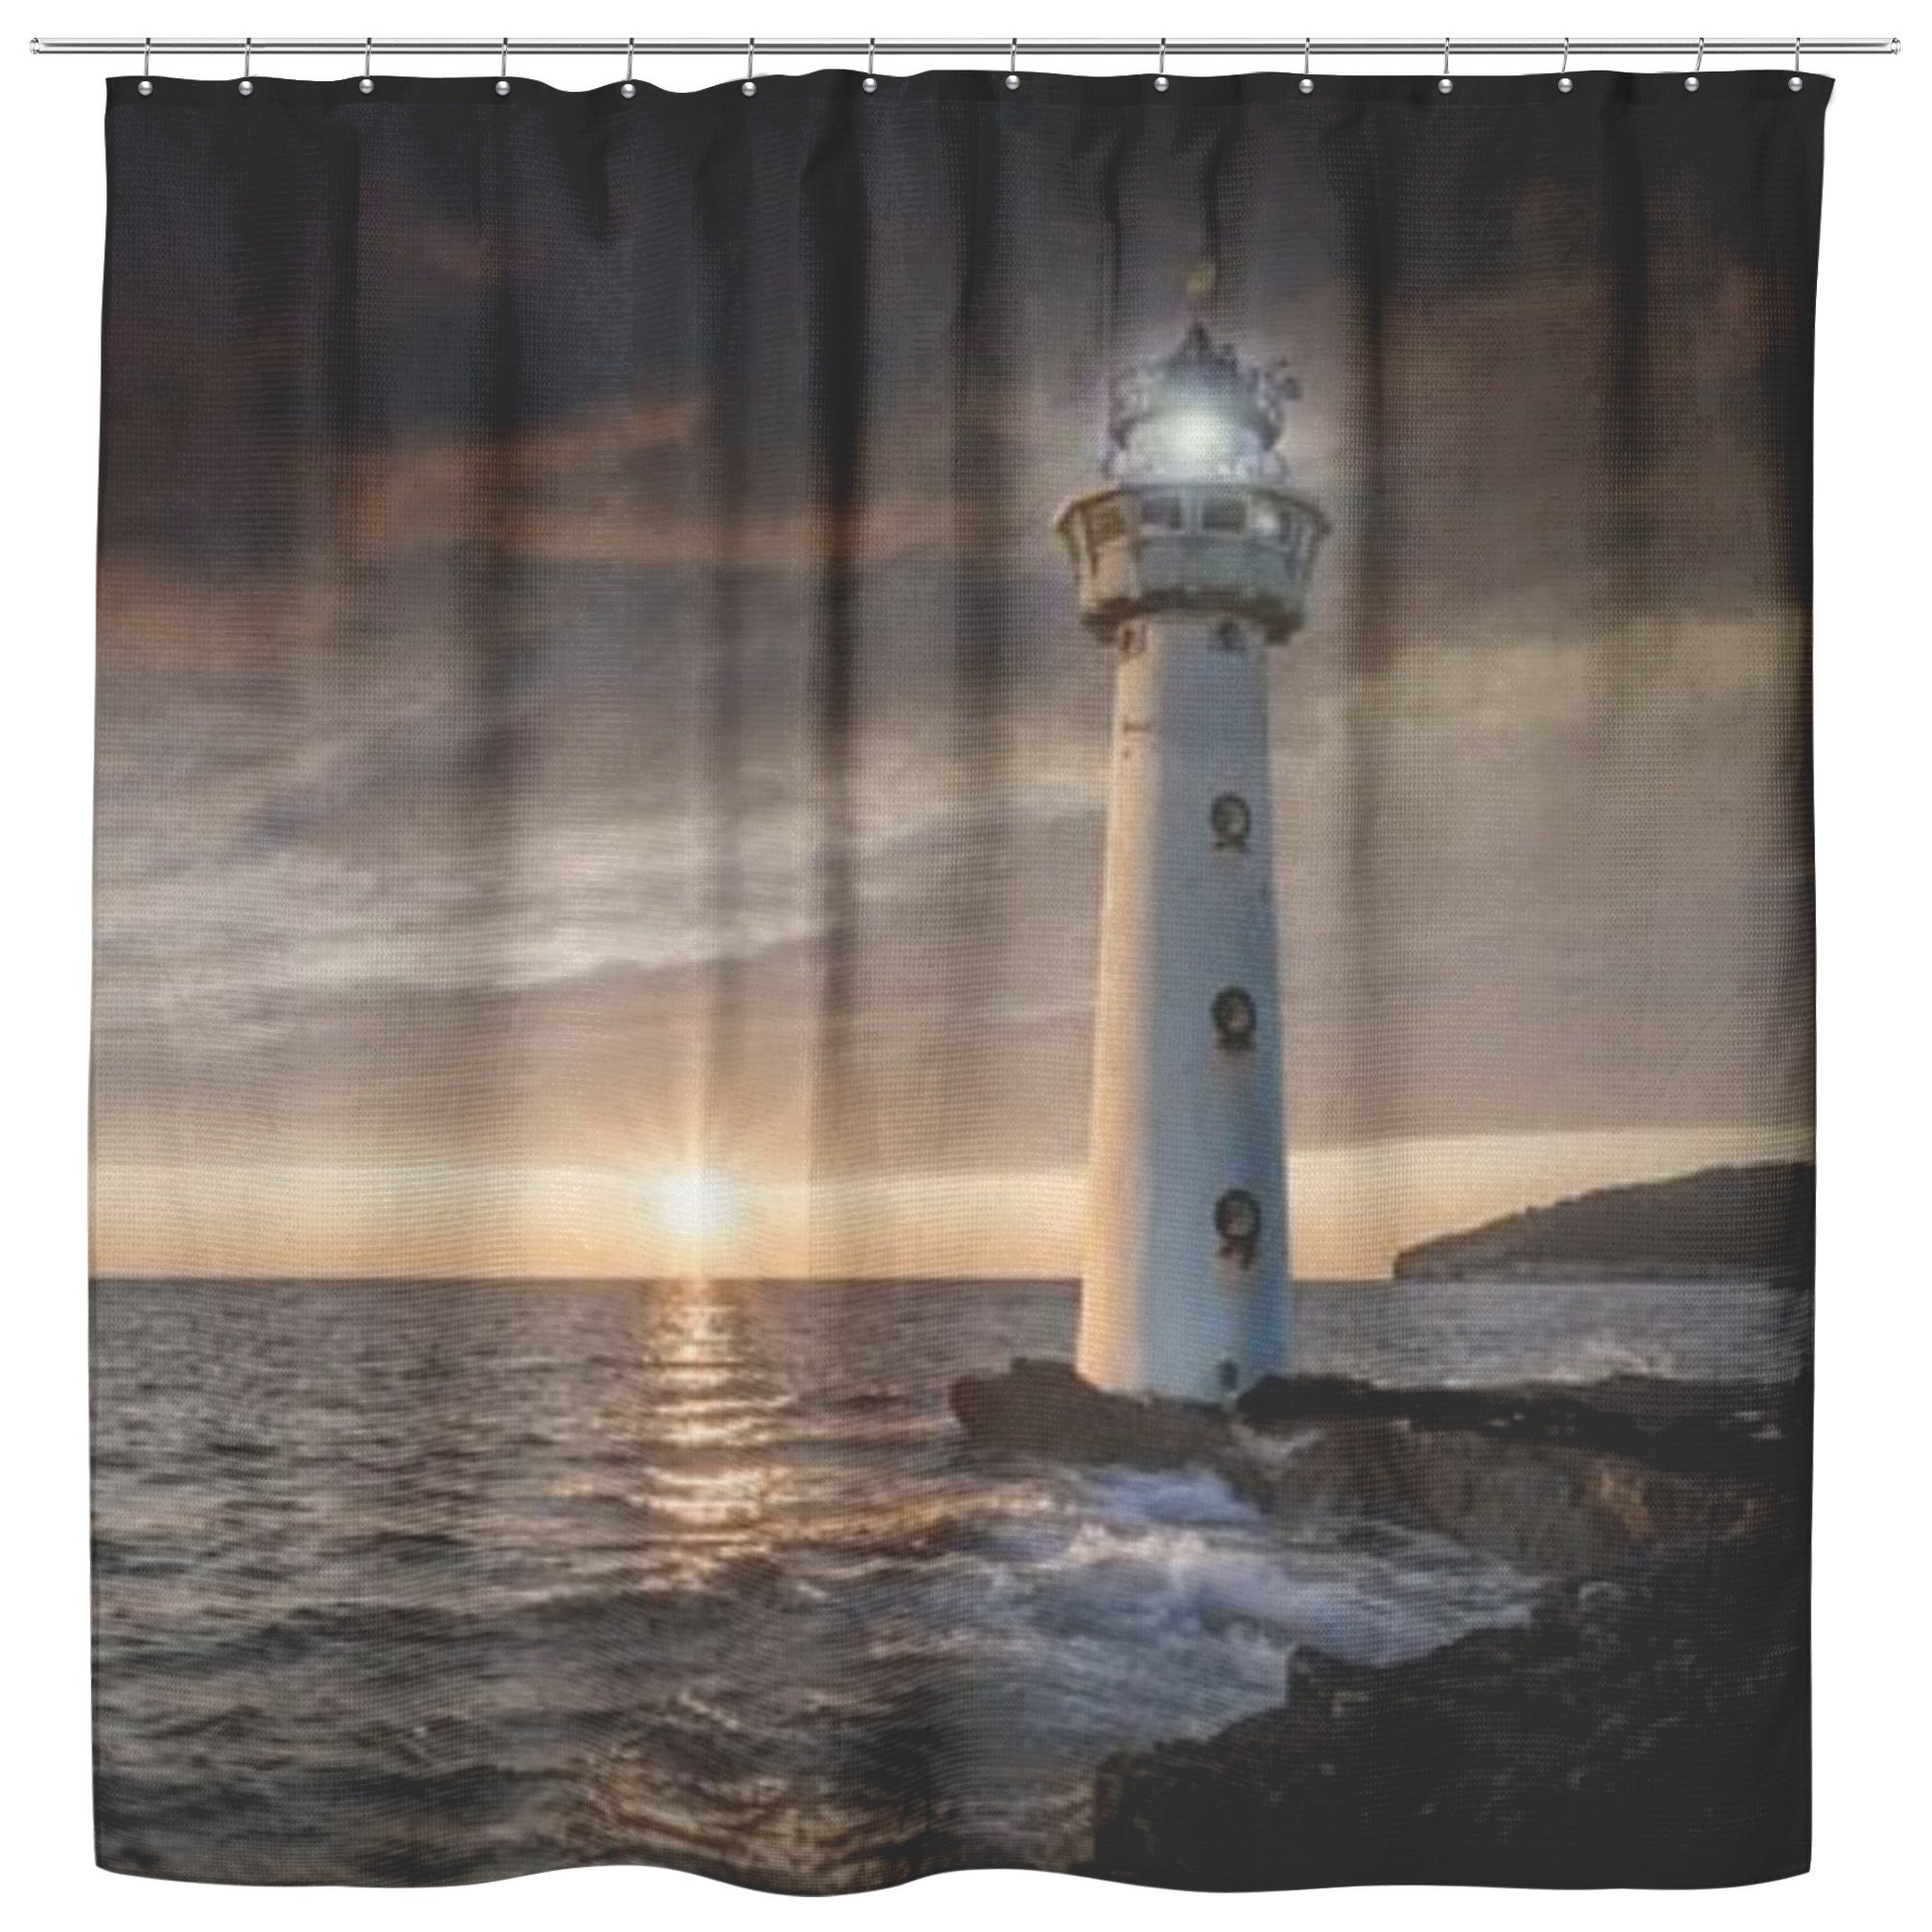 Bathroom 45x120 cm Children Bedroom and Living Room Modern transparent Curtain Half Curtain with Maritime Motif Net Curtain LIGHTHOUSE for Kitchen 